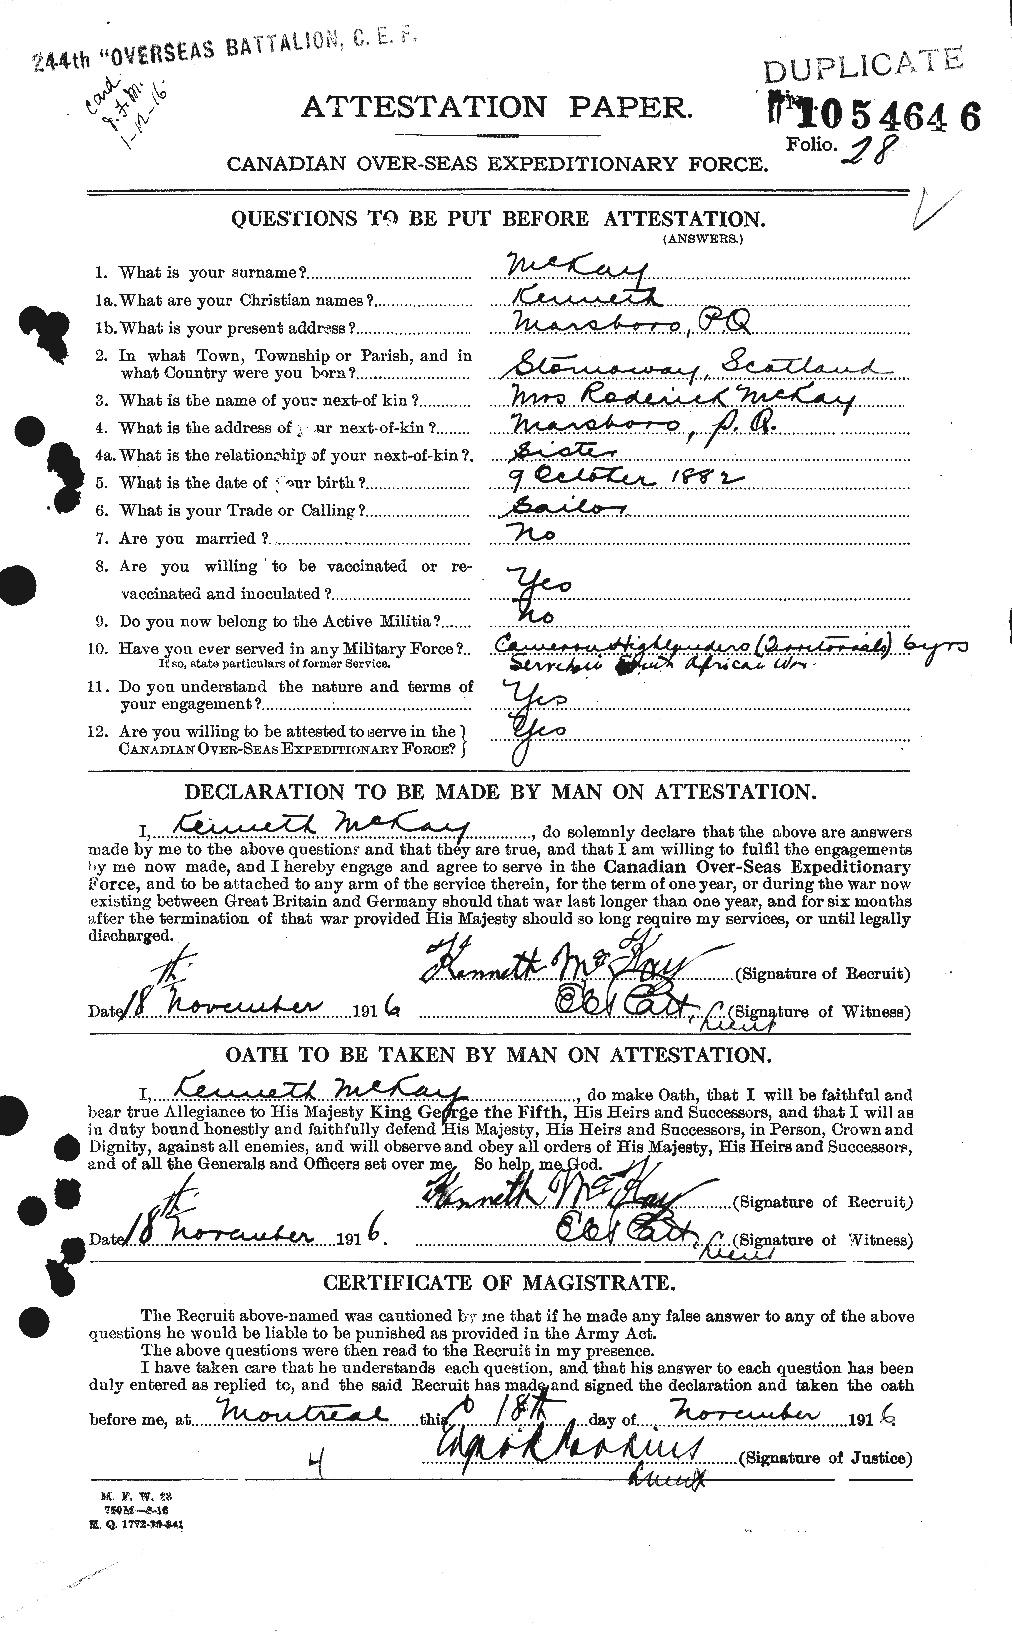 Personnel Records of the First World War - CEF 527125a